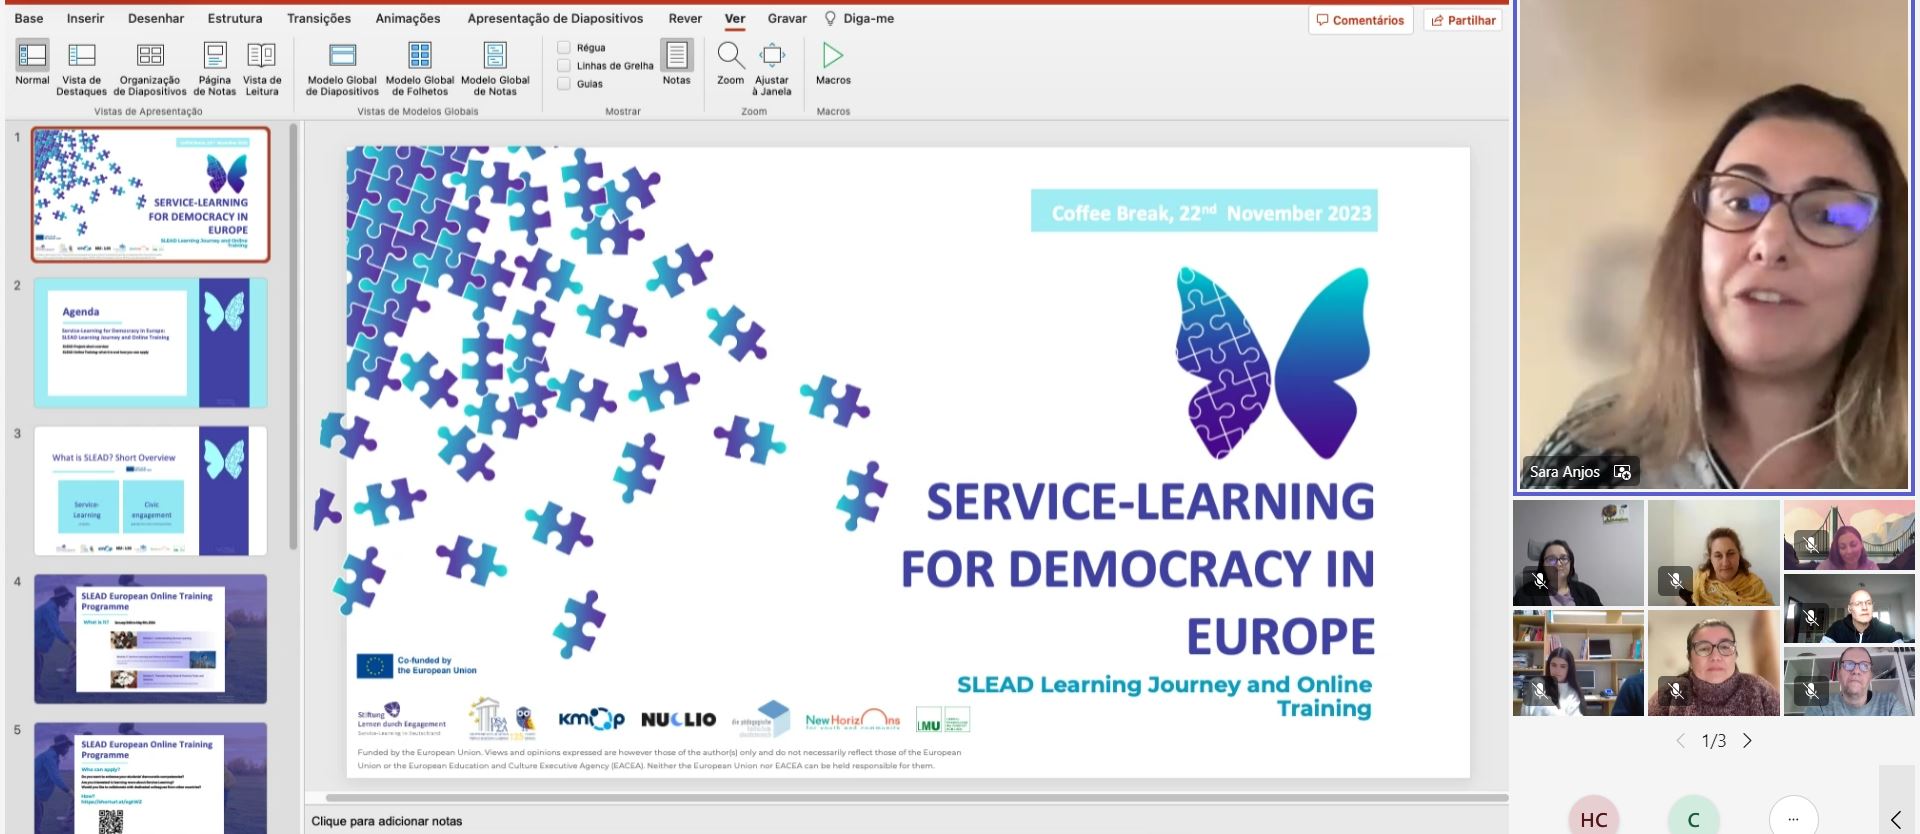 SLEAD Learning Journey and Online Training